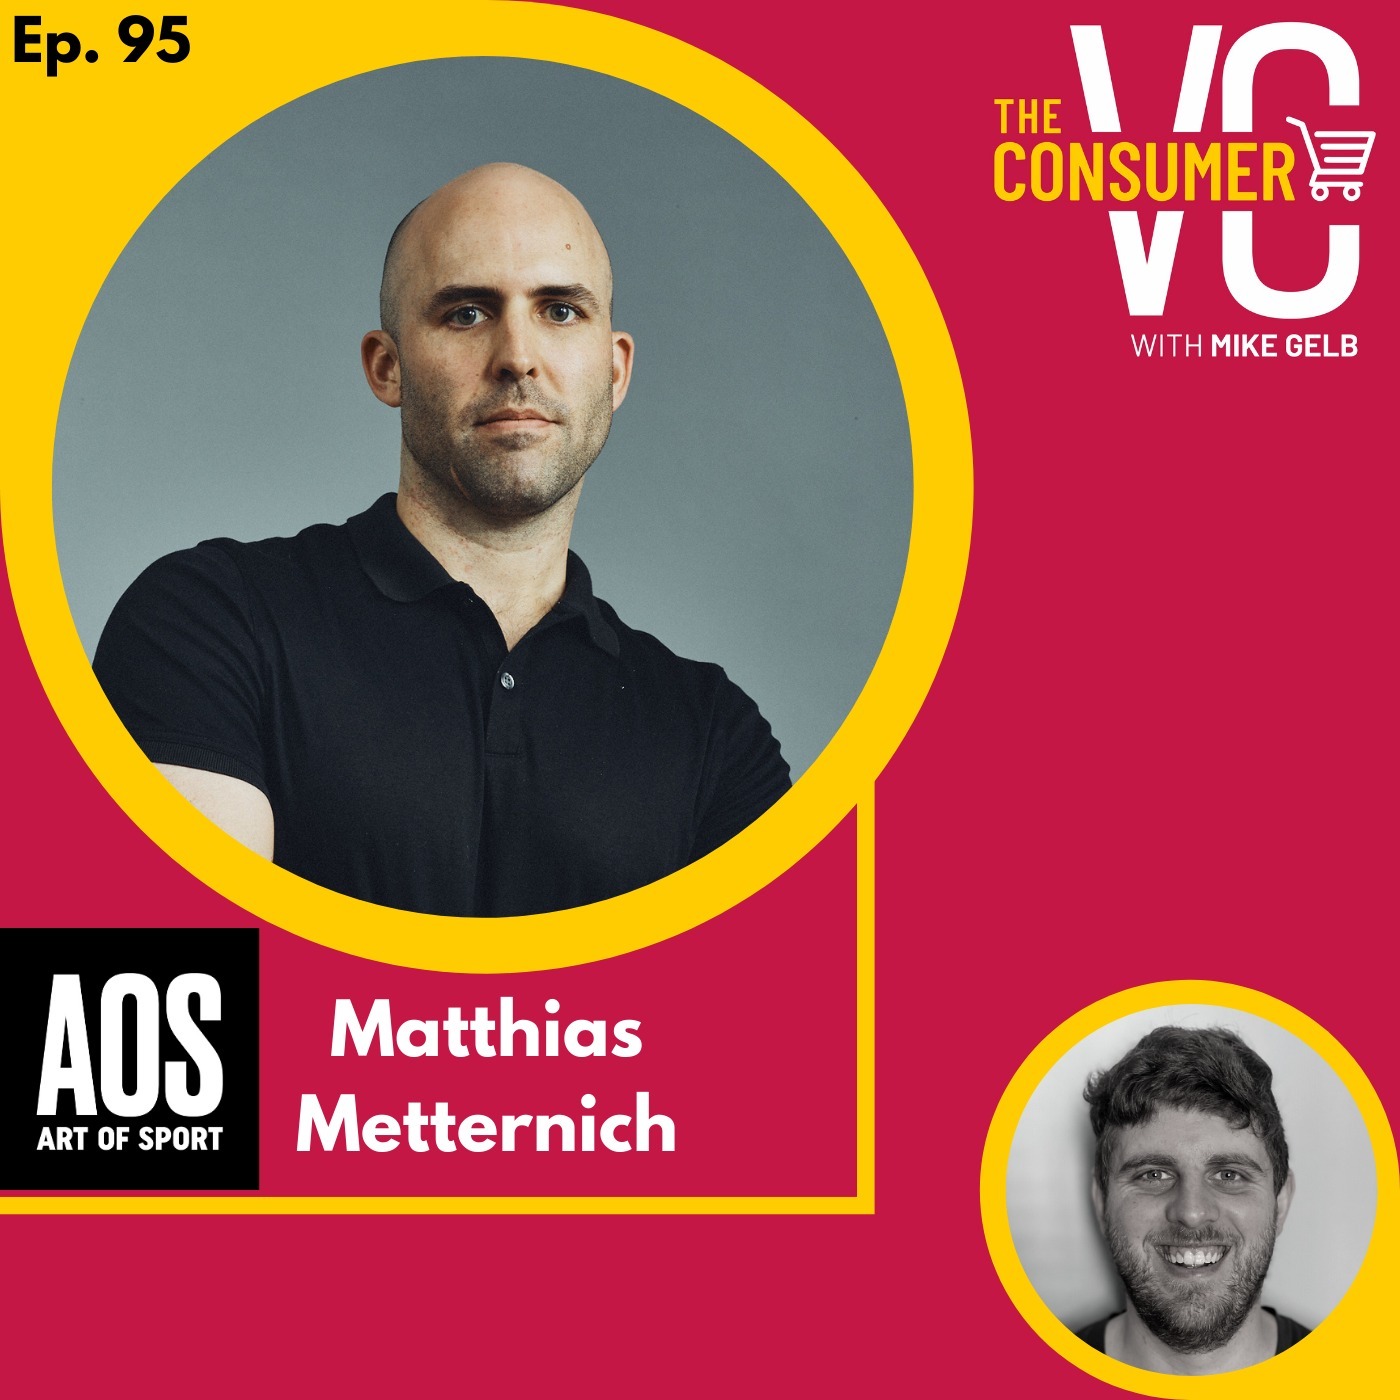 Matthias Metternich (Art of Sport) - Building the Nike of Body Care, The Power of the Athlete, and How to Build a Compelling Story for Retail